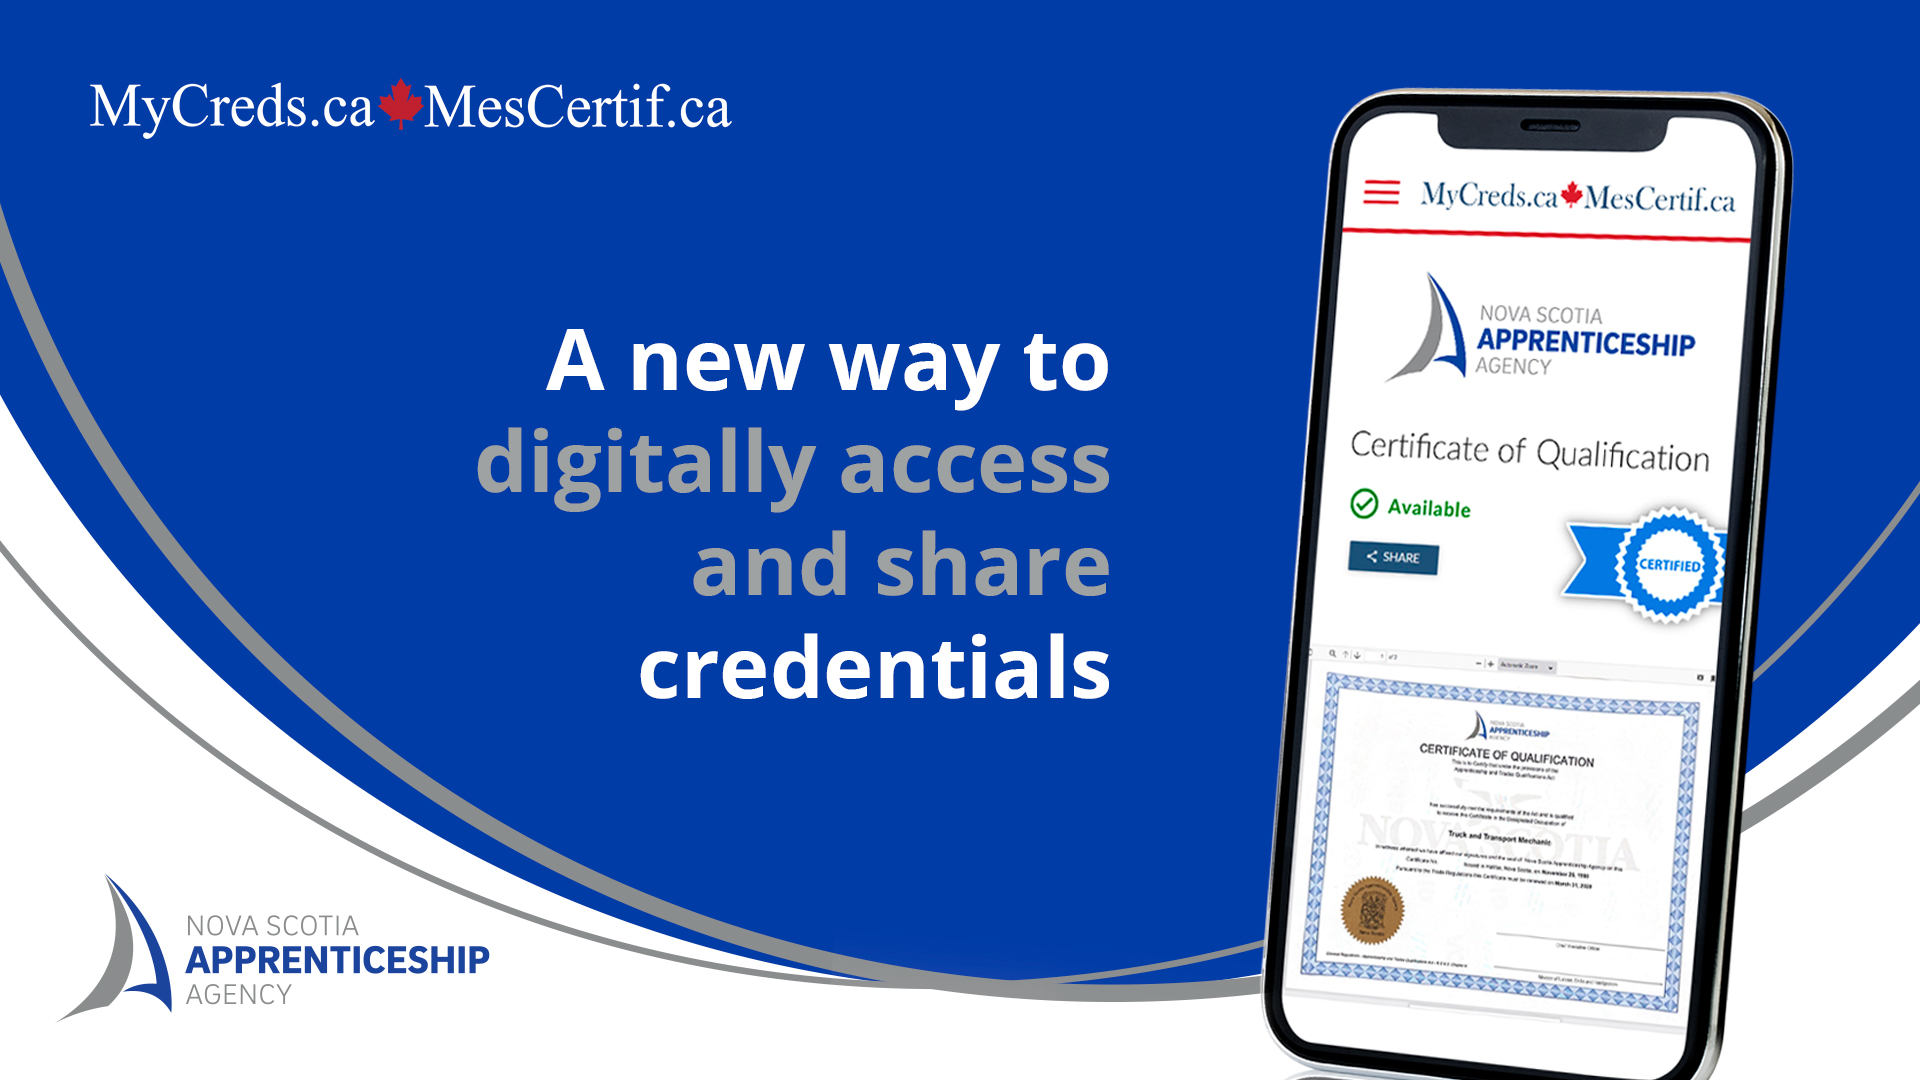 MyCreds, a new way to digitally access and share credentials